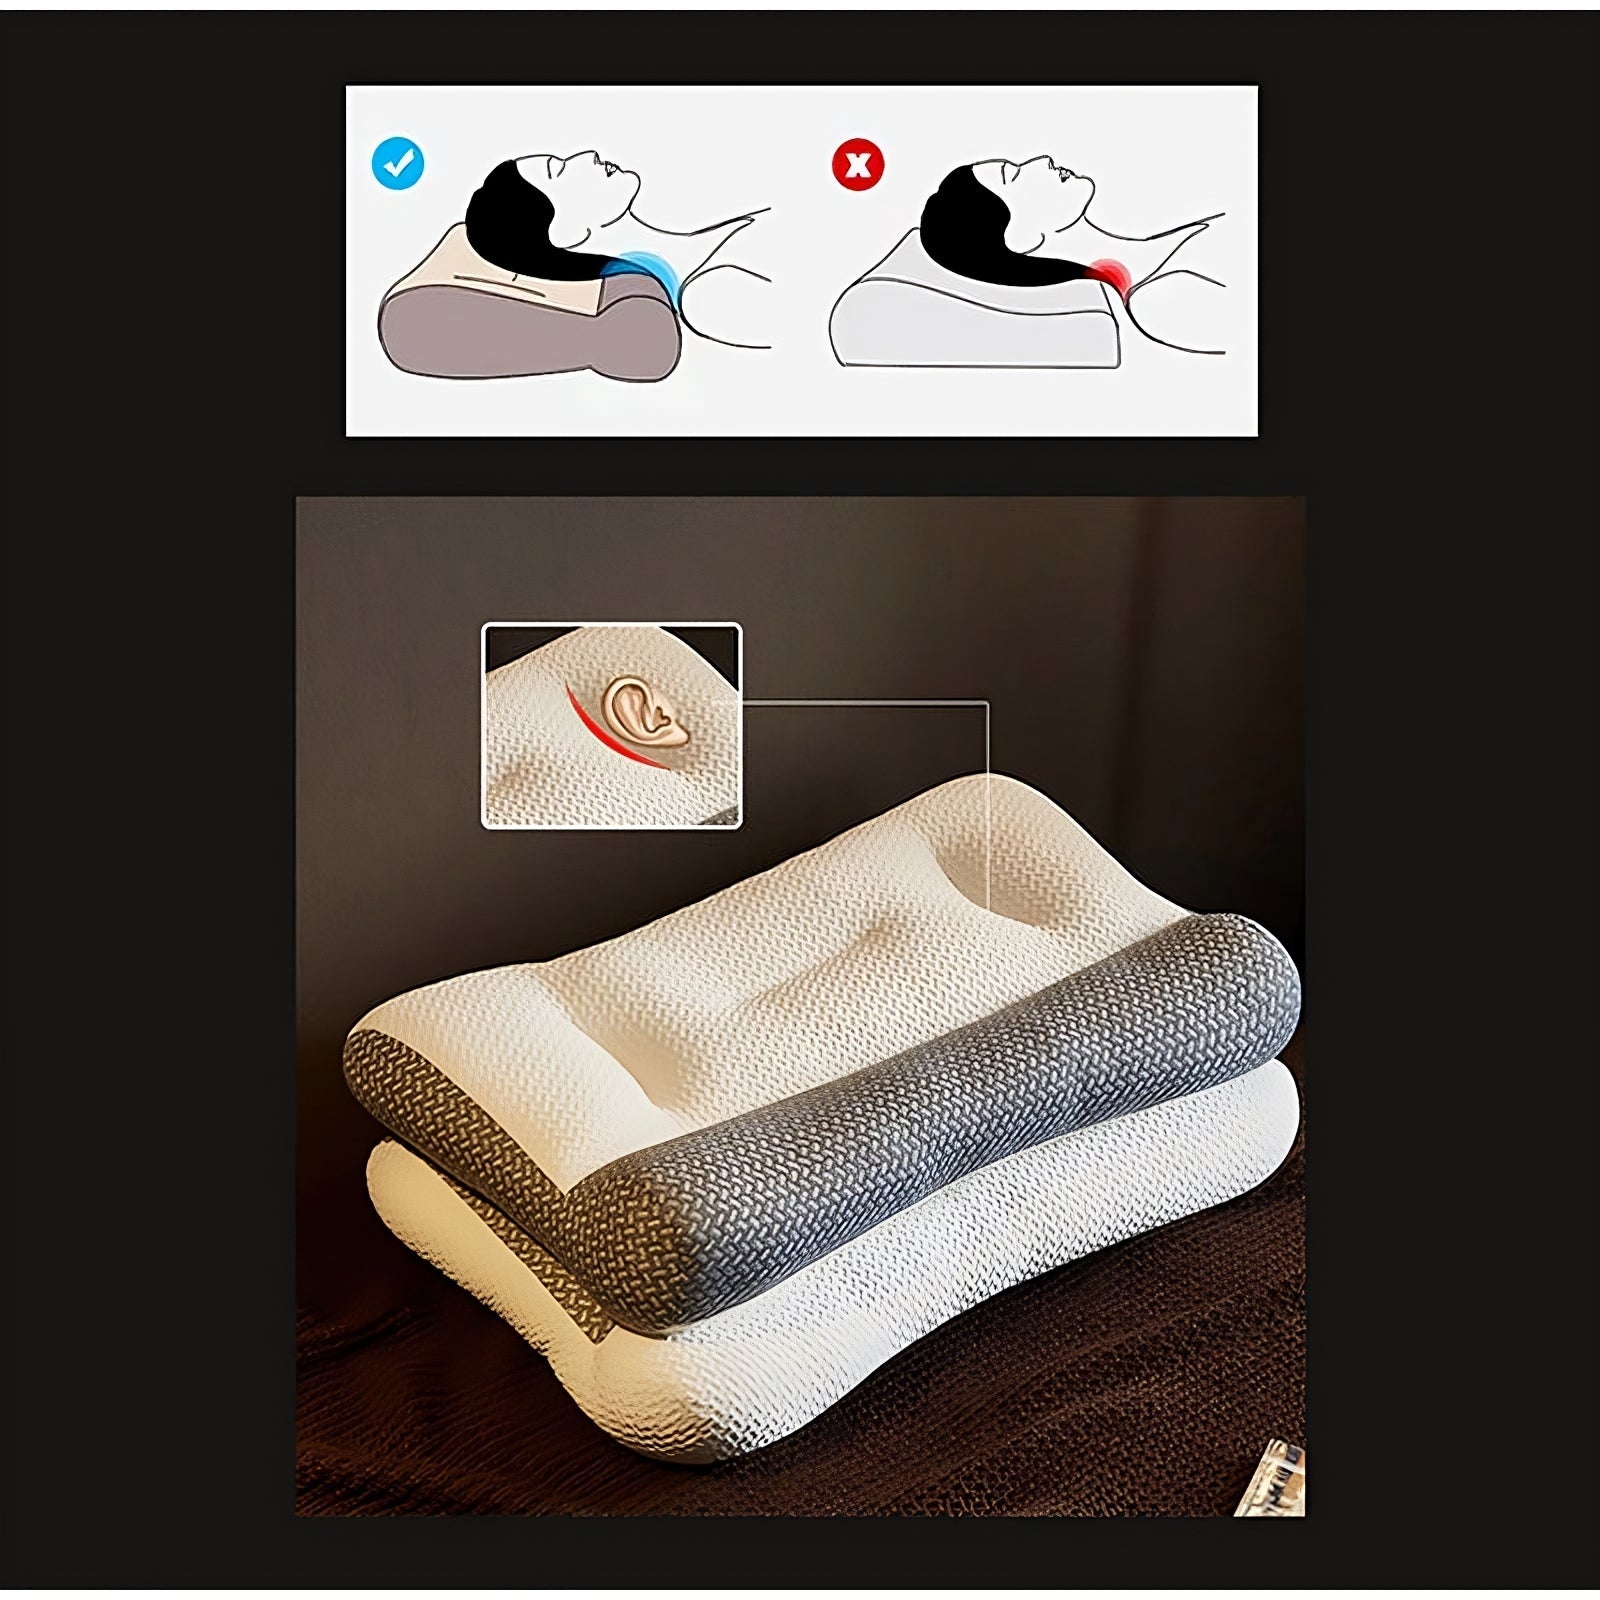 SOHOBLOO'S Super Ergonomic Pillow - Protect your neck and spine